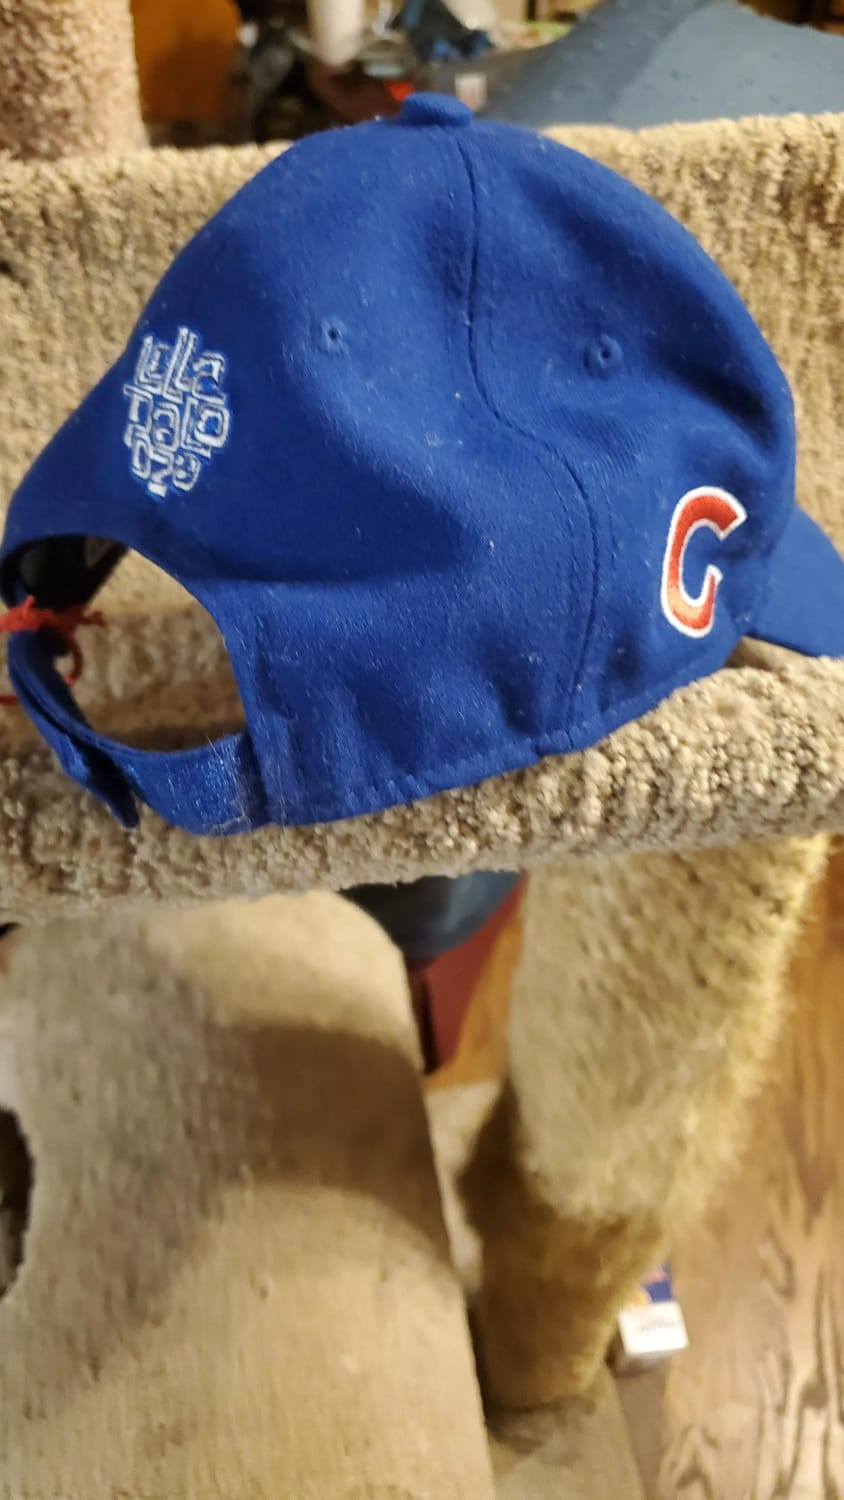 I snagged this Lollapalooza Cubs hat at an antique store in Charlotte NC